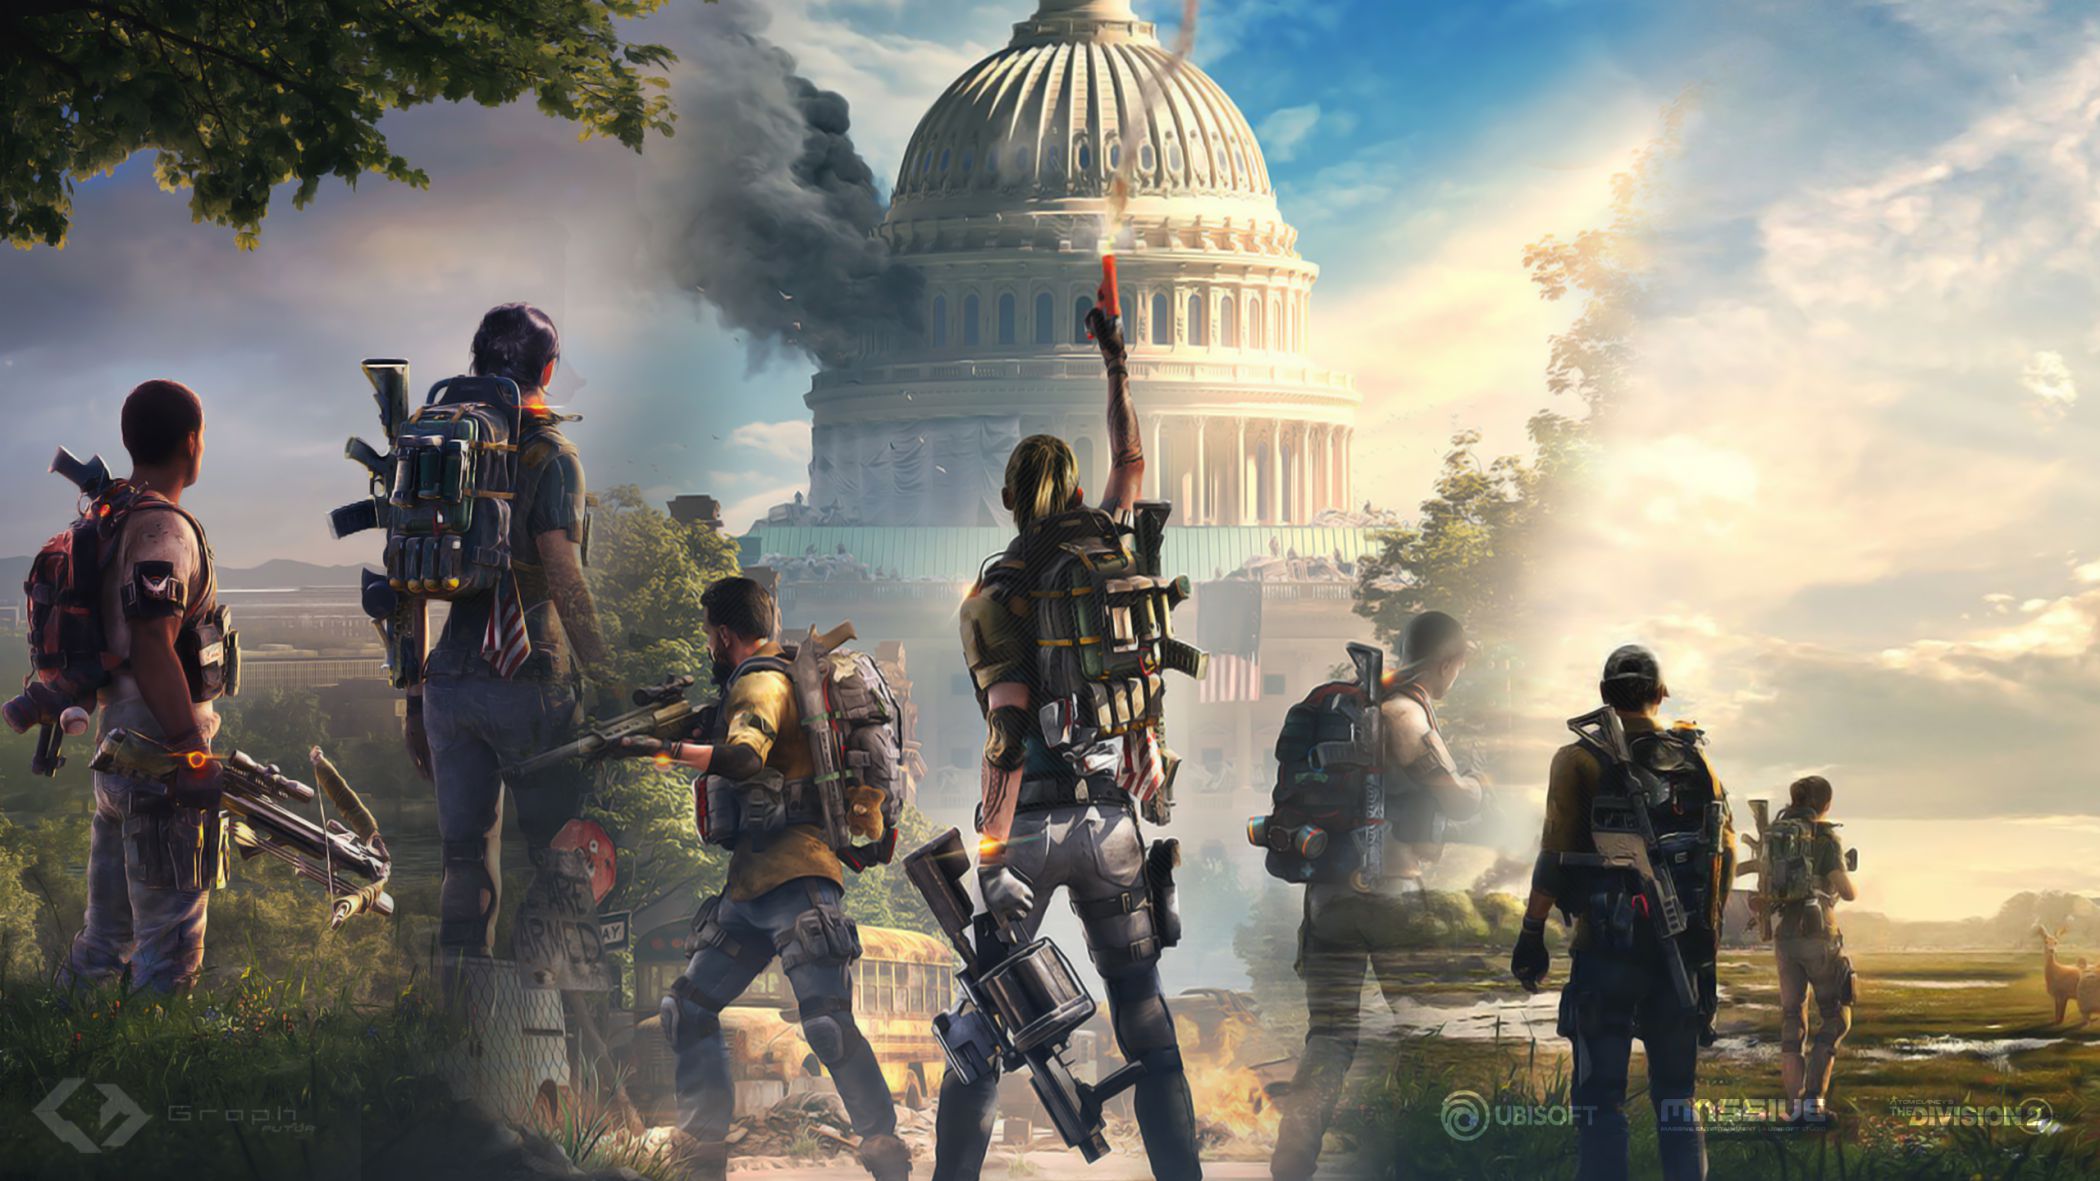 division 2 epic games store